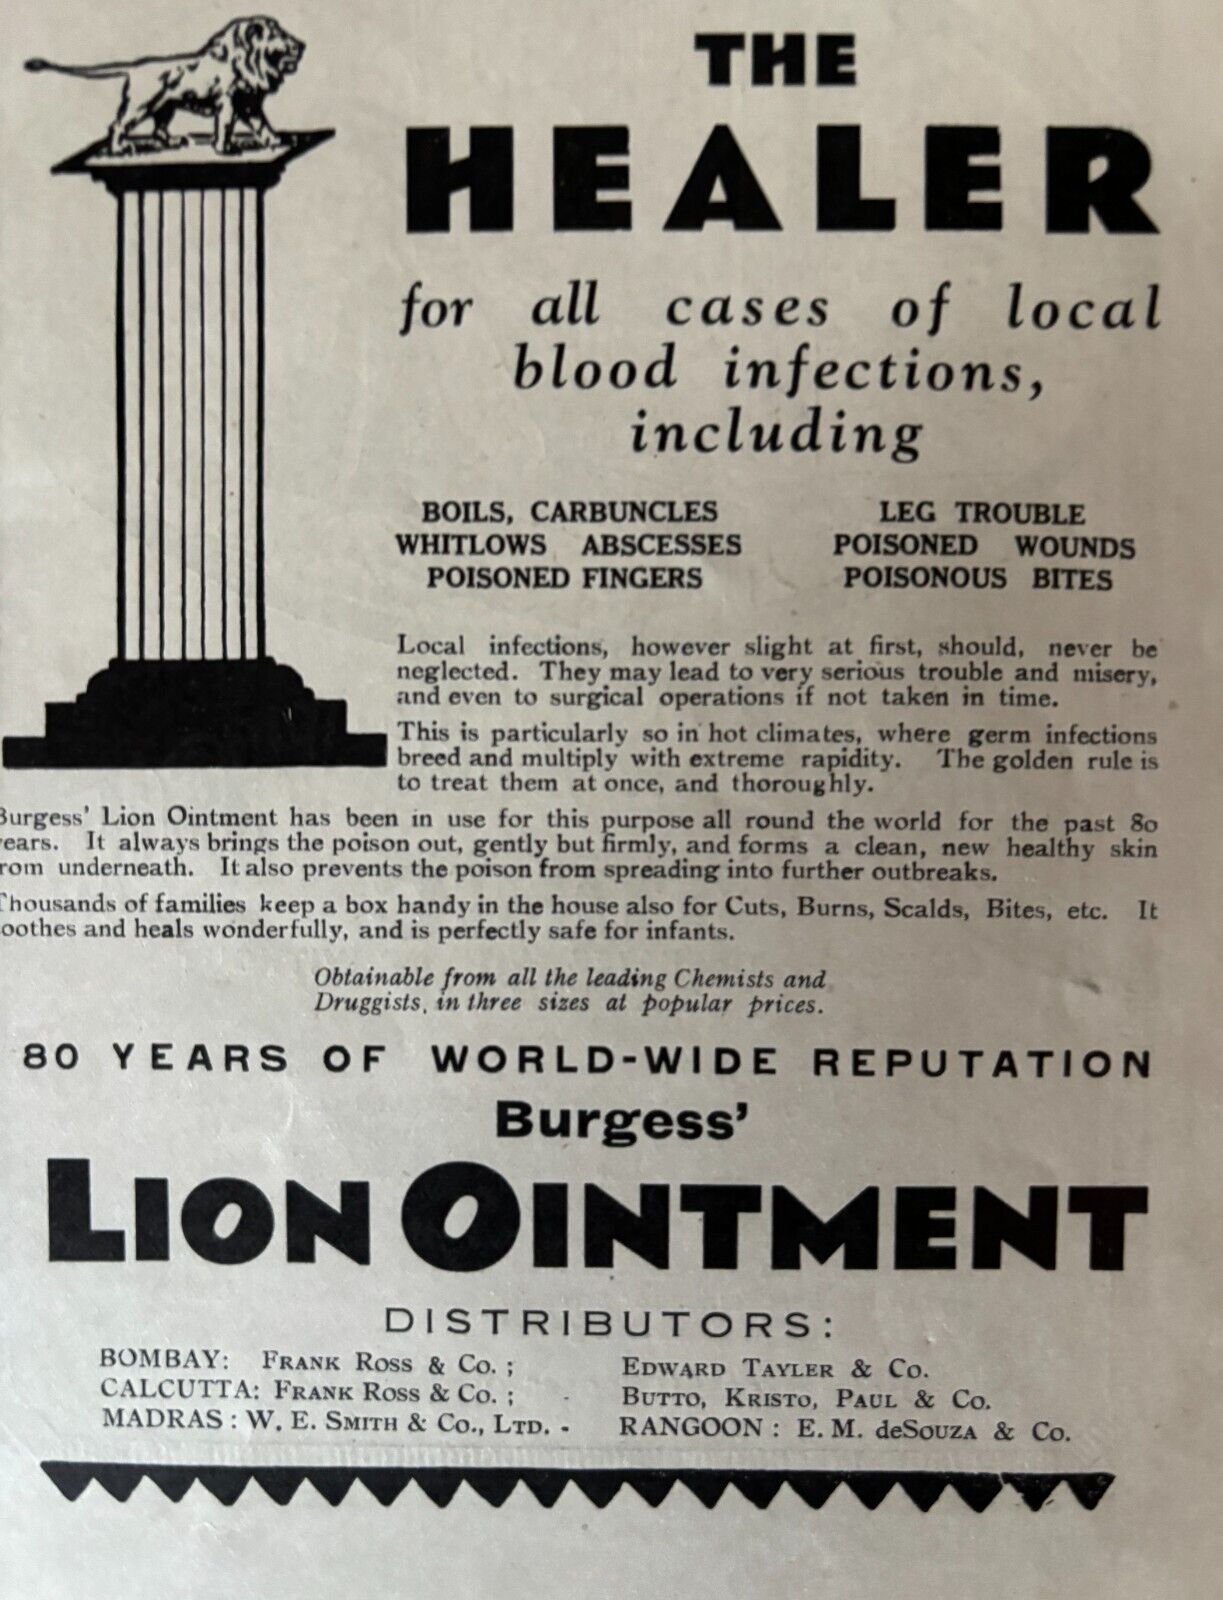 BURGESS LION OINTMENT THE HEALER INDIA BLOOD INFECTIONS VINTAGE PRINT AD 1930